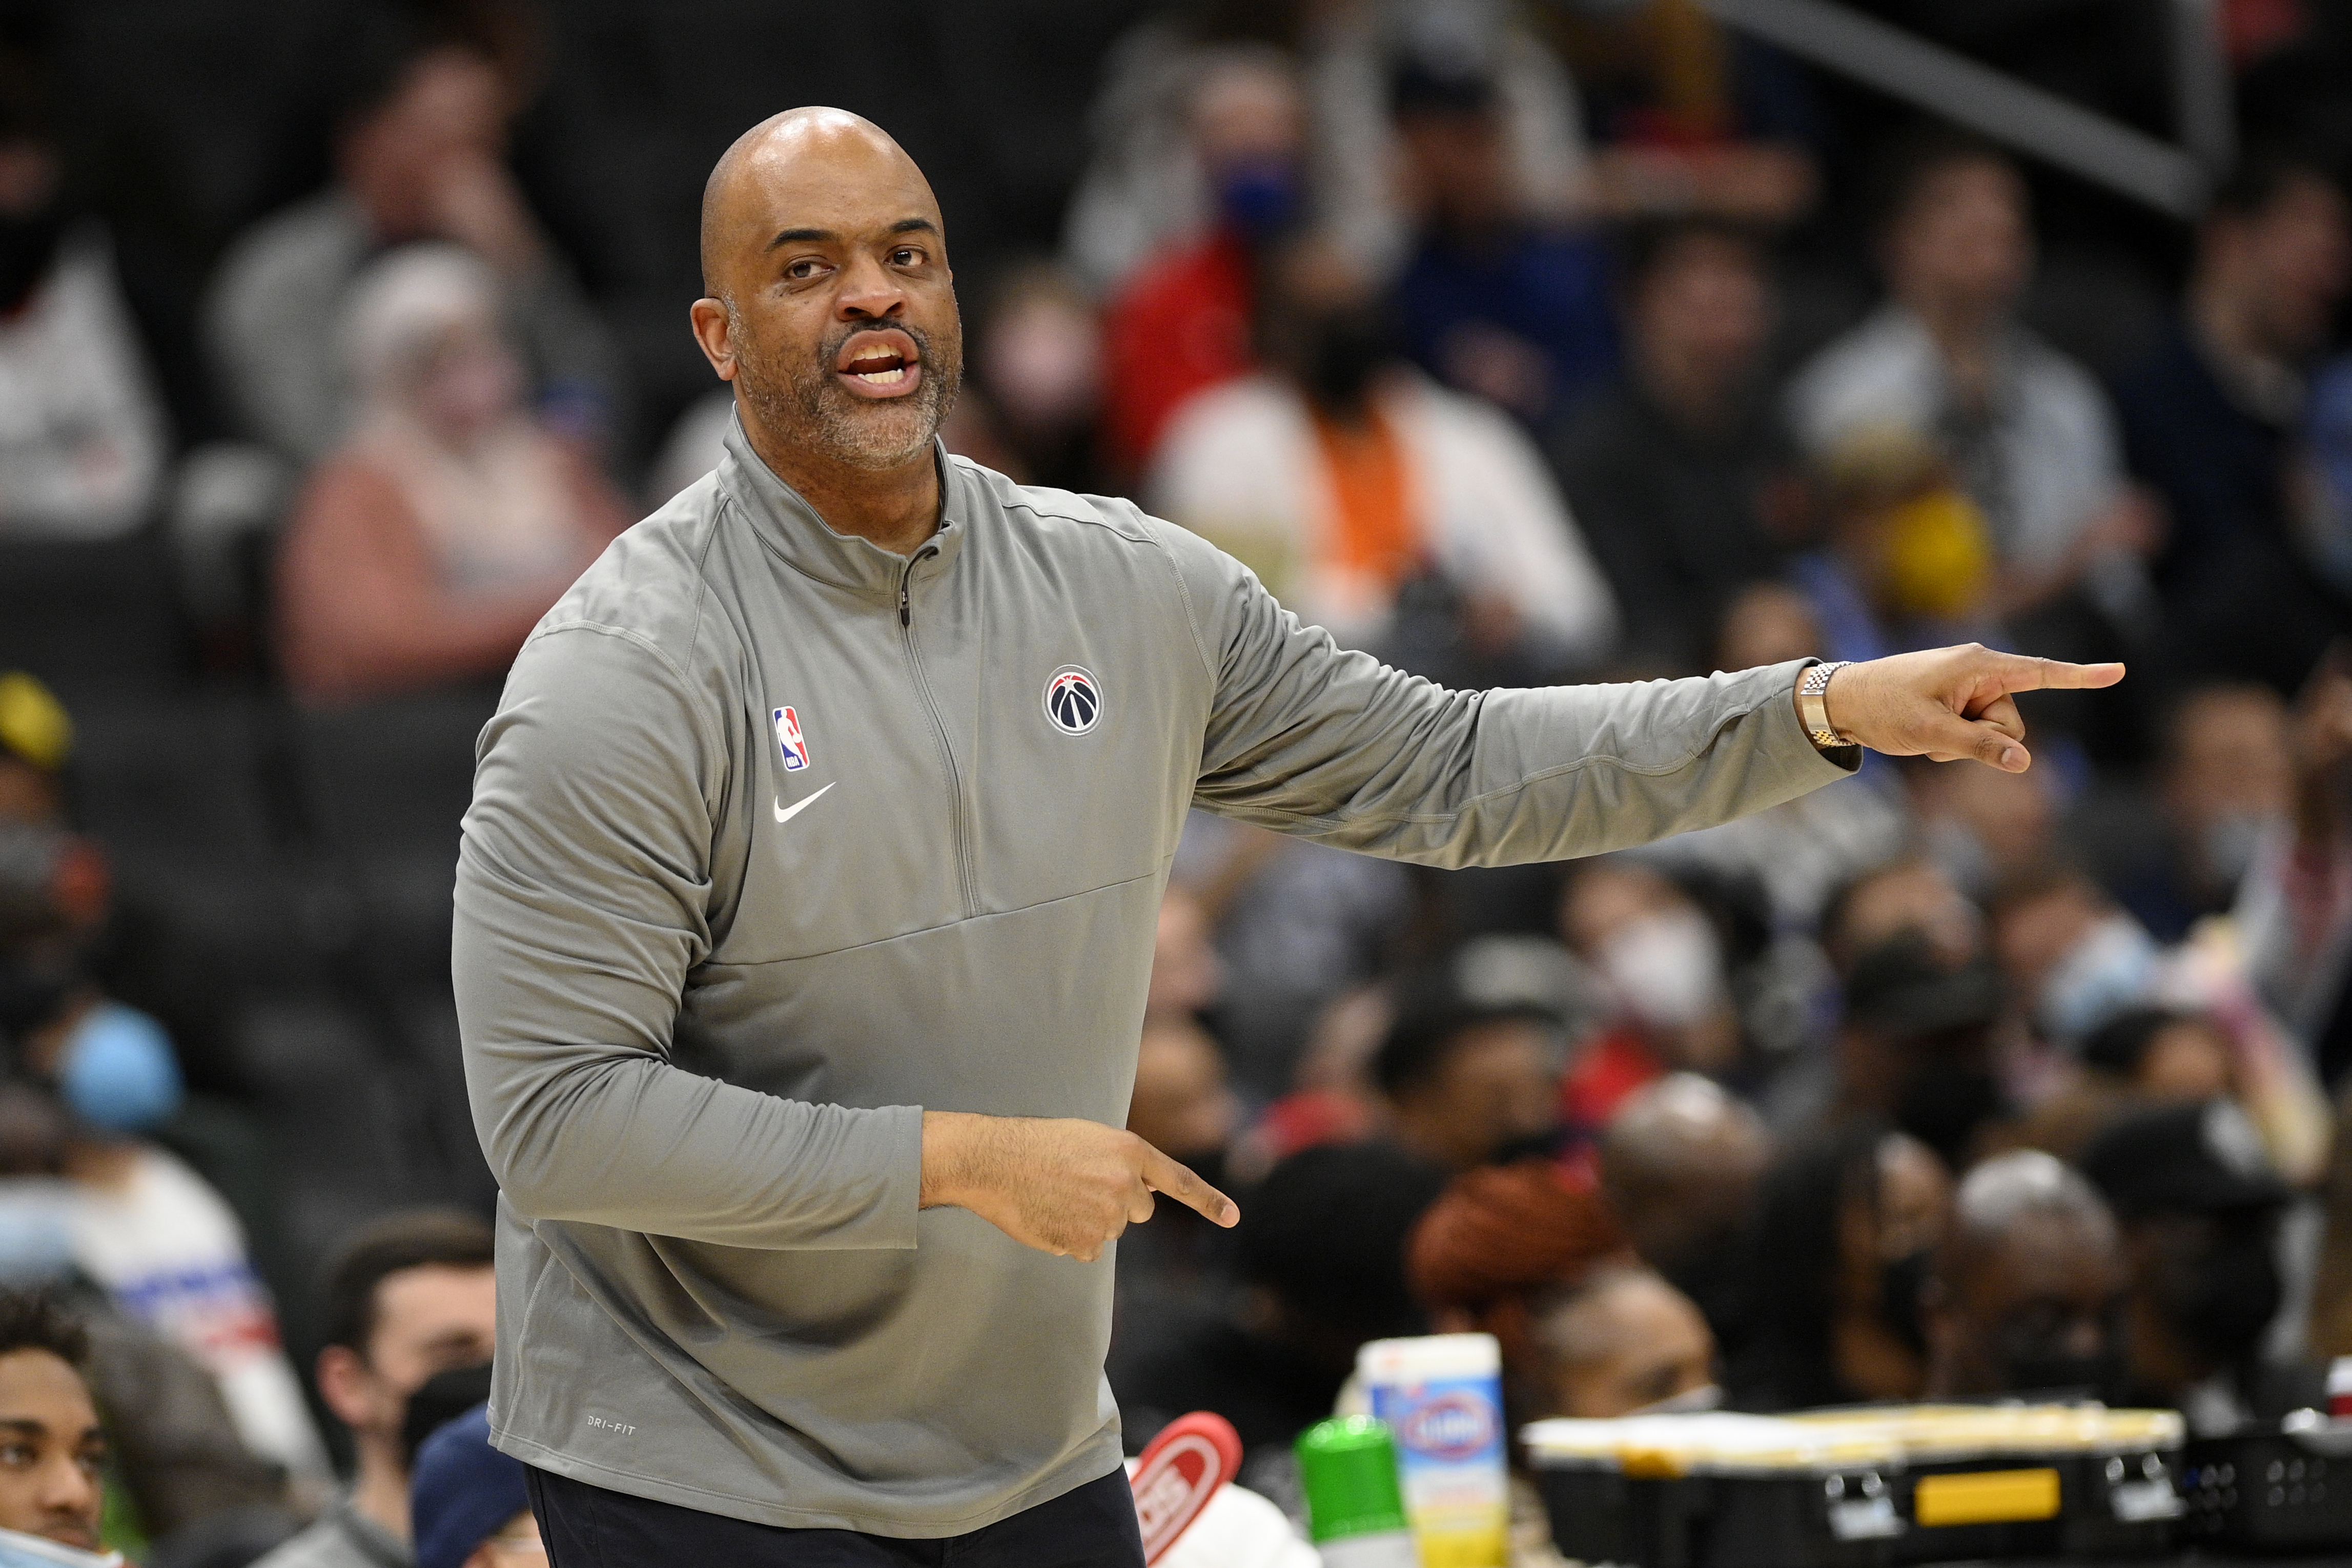 Wes Unseld, Jr. enters the NBA's health and safety protocols